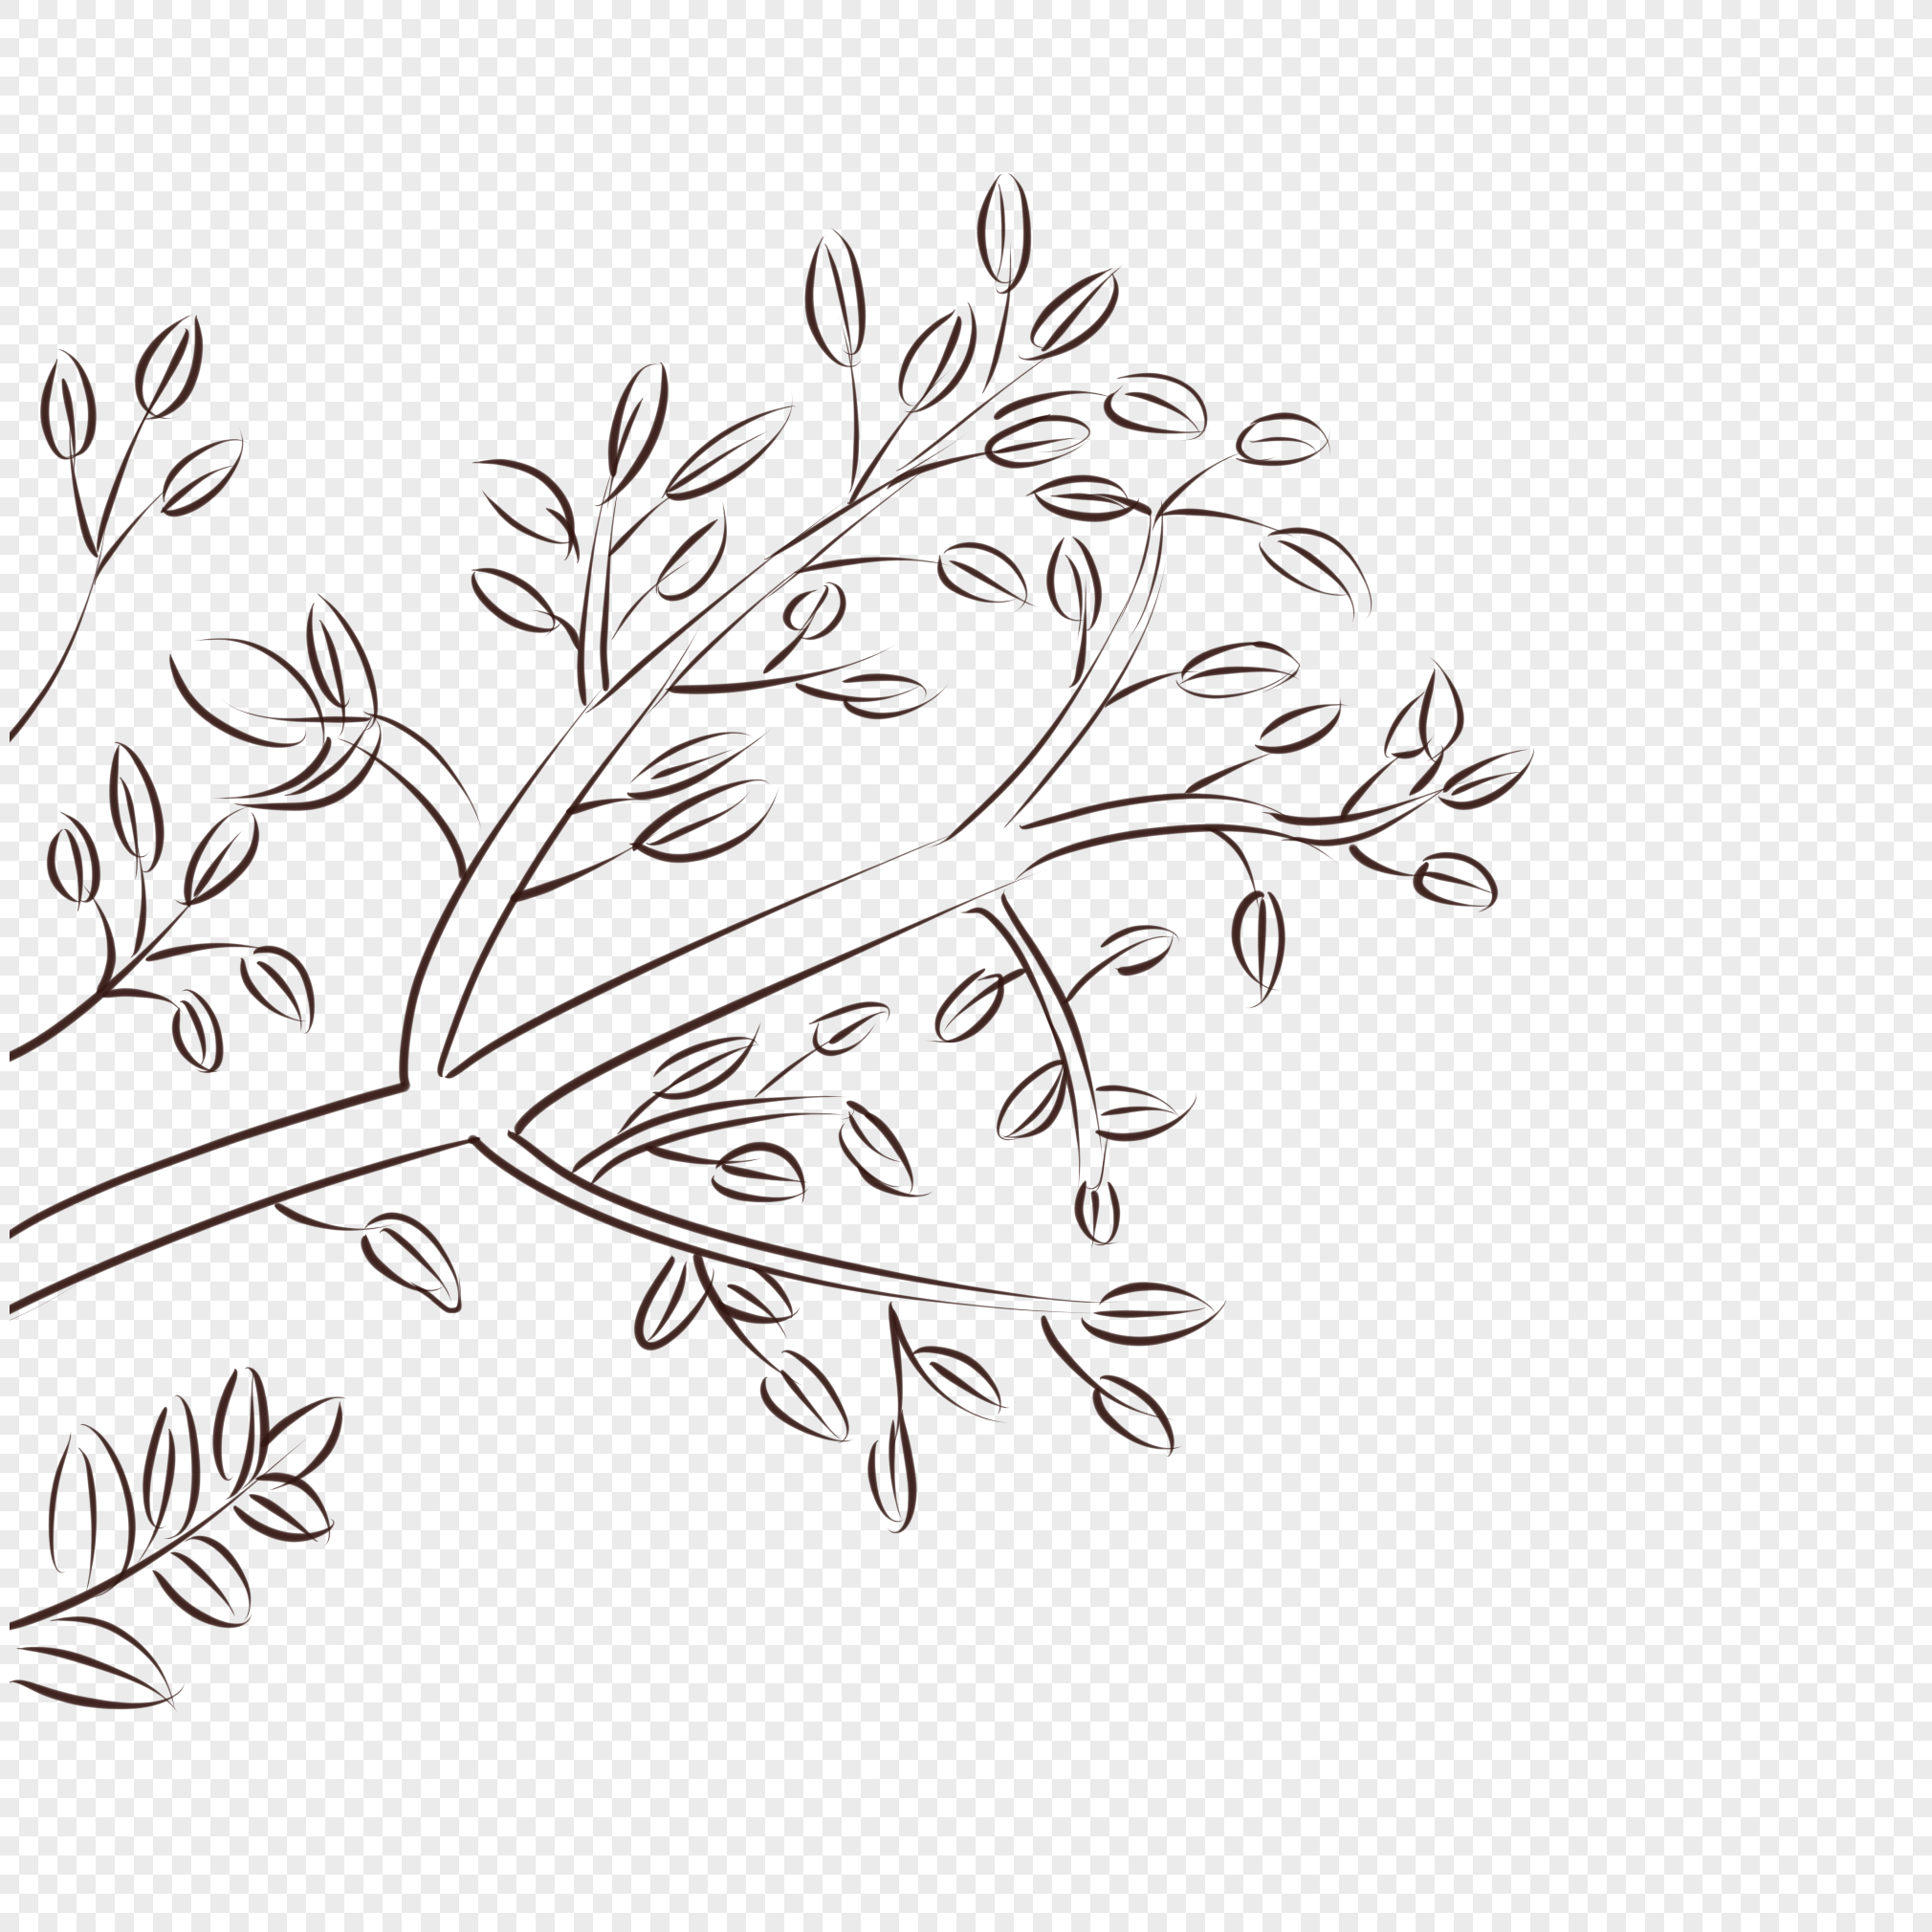 Drawing Coloring book Black and white Leaf Line art, Leaf, branch,  monochrome png | PNGEgg